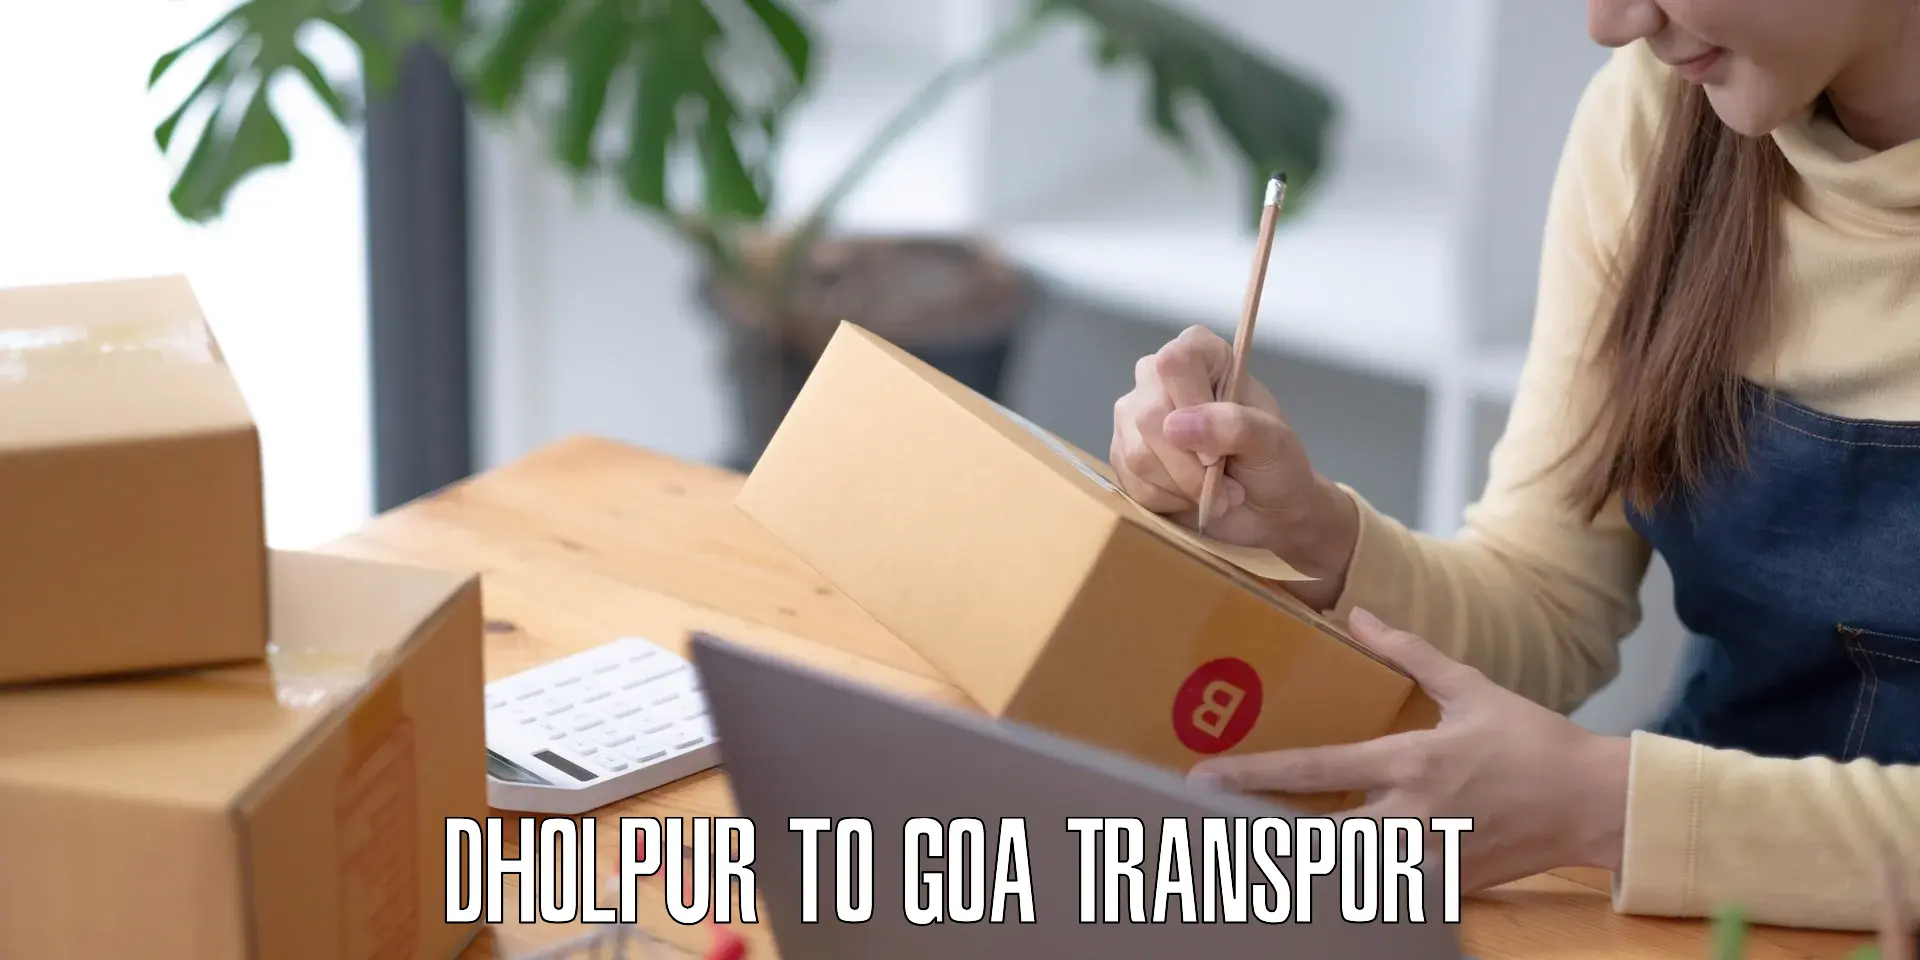 Nearby transport service Dholpur to Goa